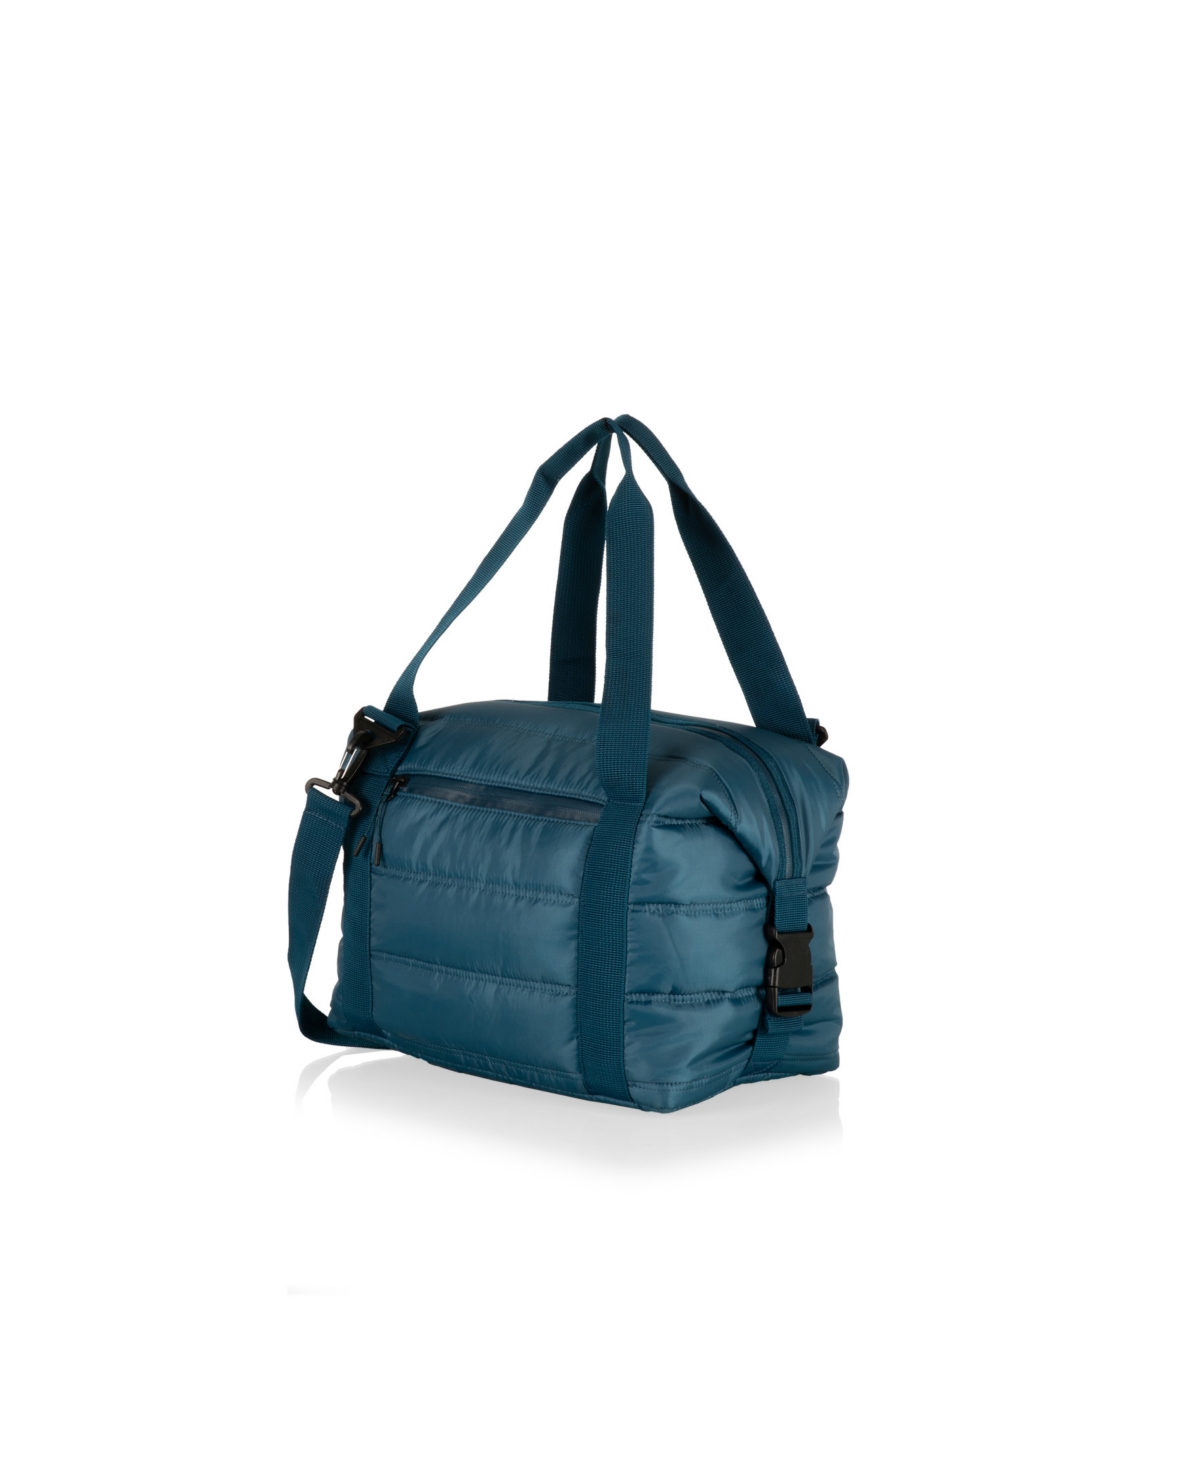 Oniva All-day Tote Bag In Beryl Blue